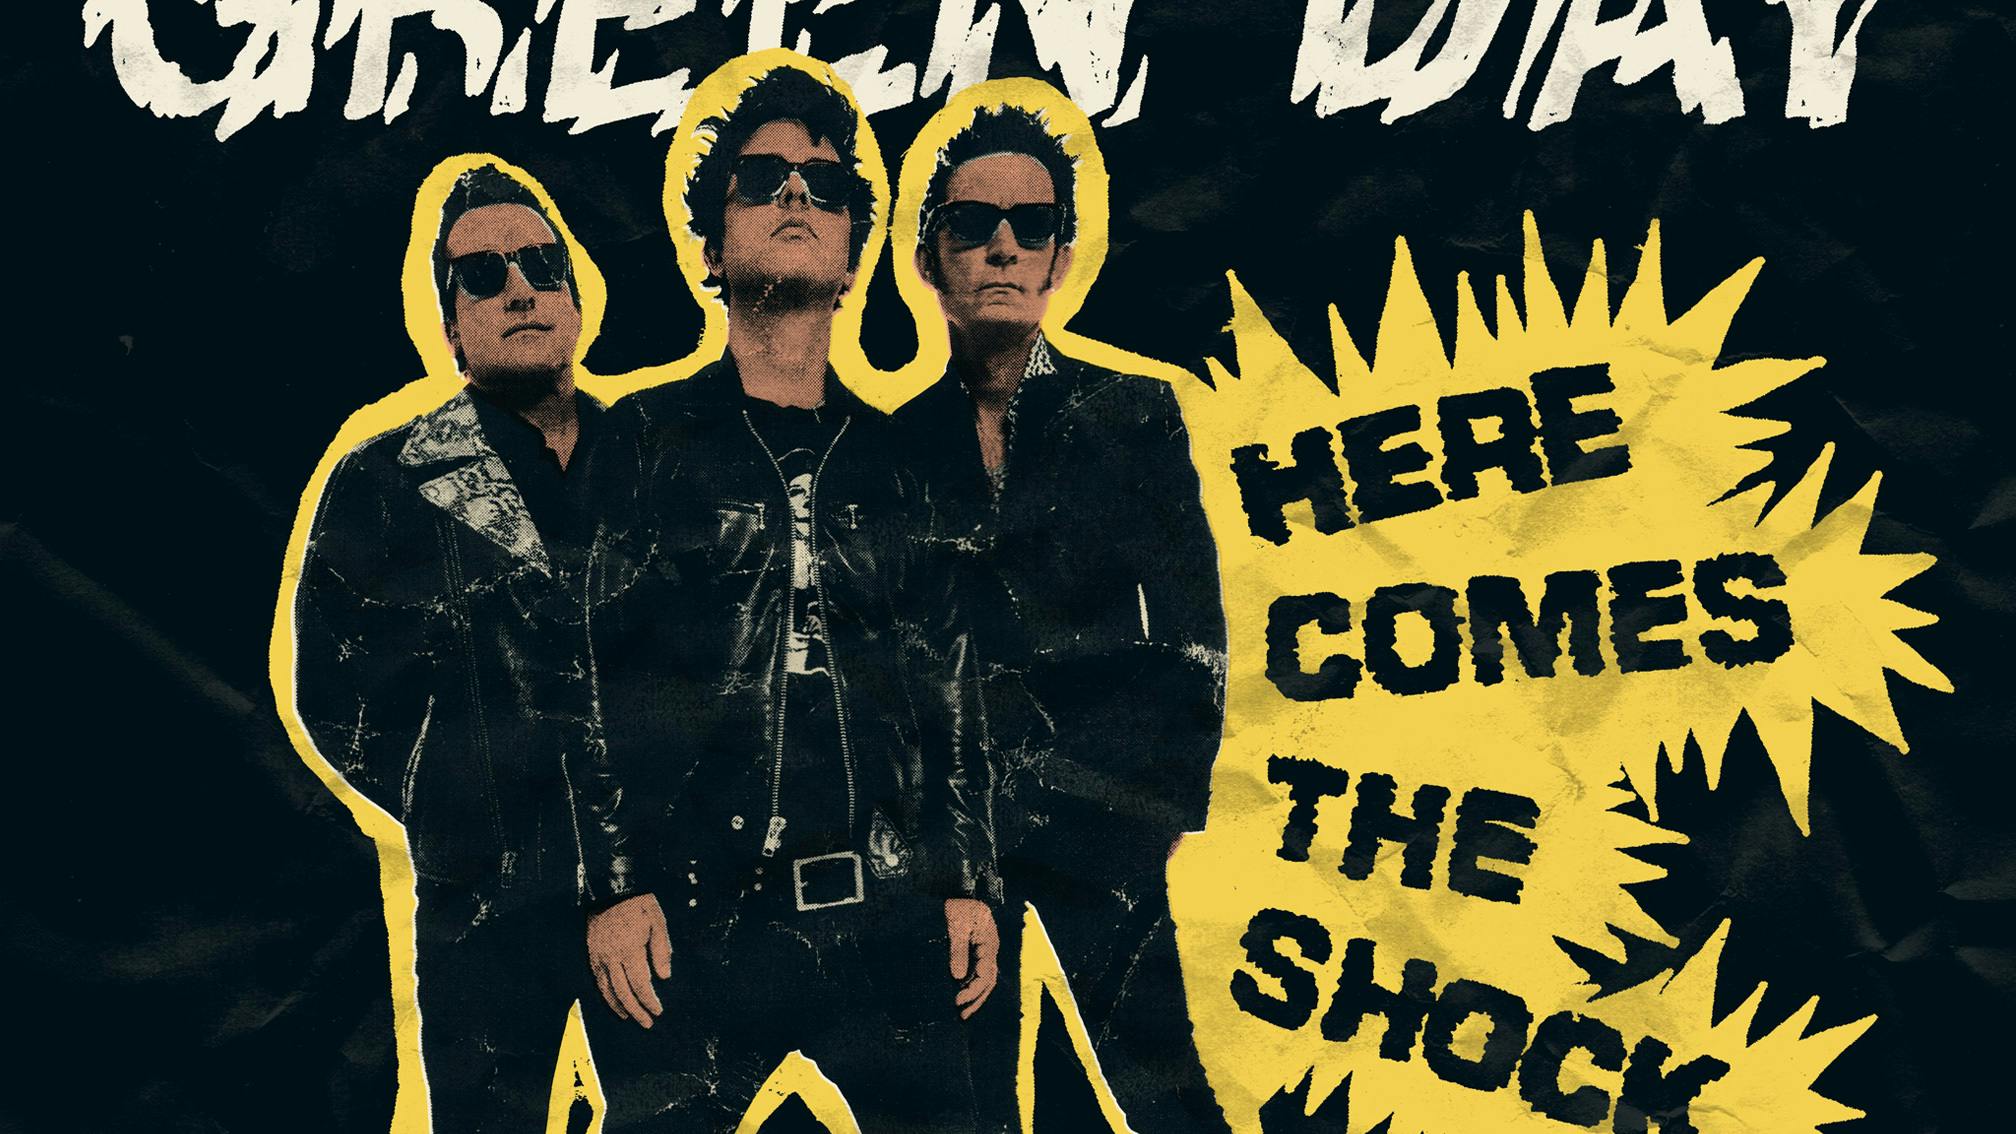 Green Day are premiering a brand-new single this weekend